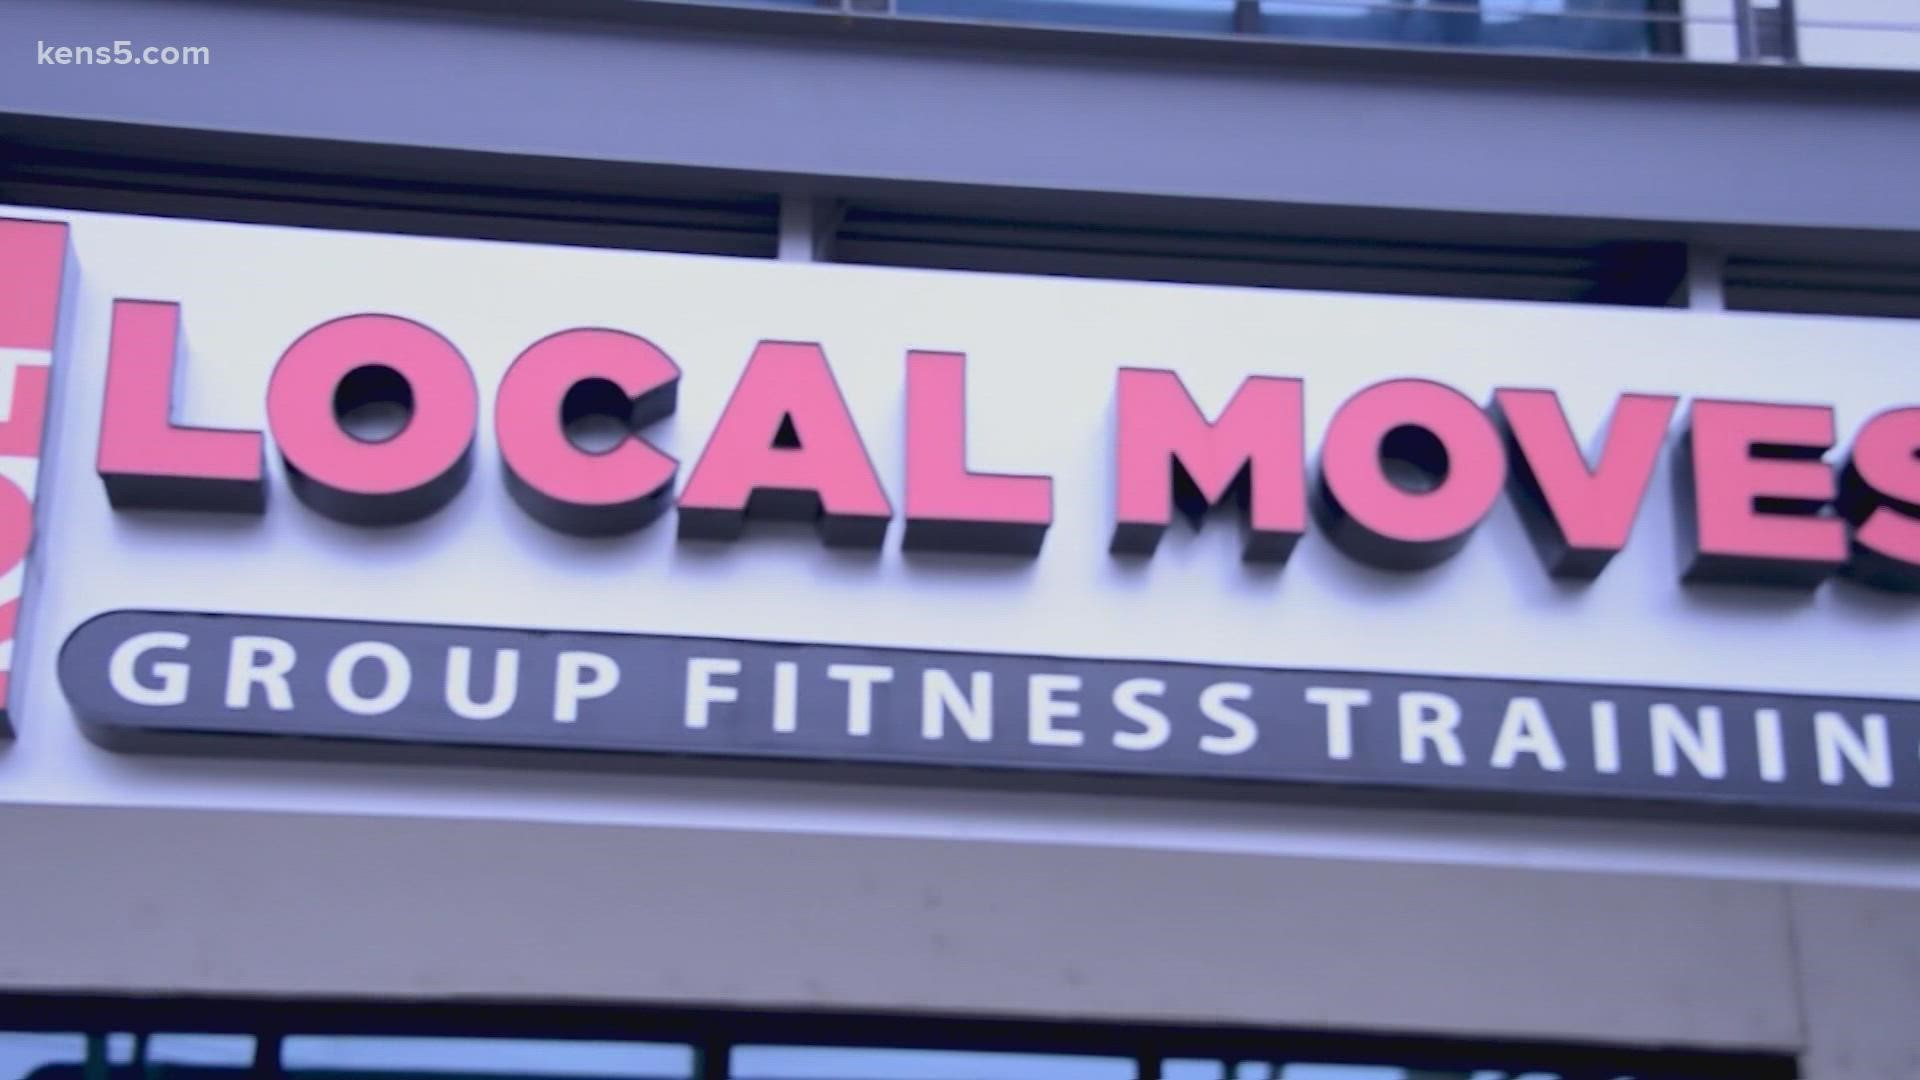 Local Moves is a brand-new fitness studio in San Antonio that offers a unique approach to circuit training. While you break a sweat, you build connections.